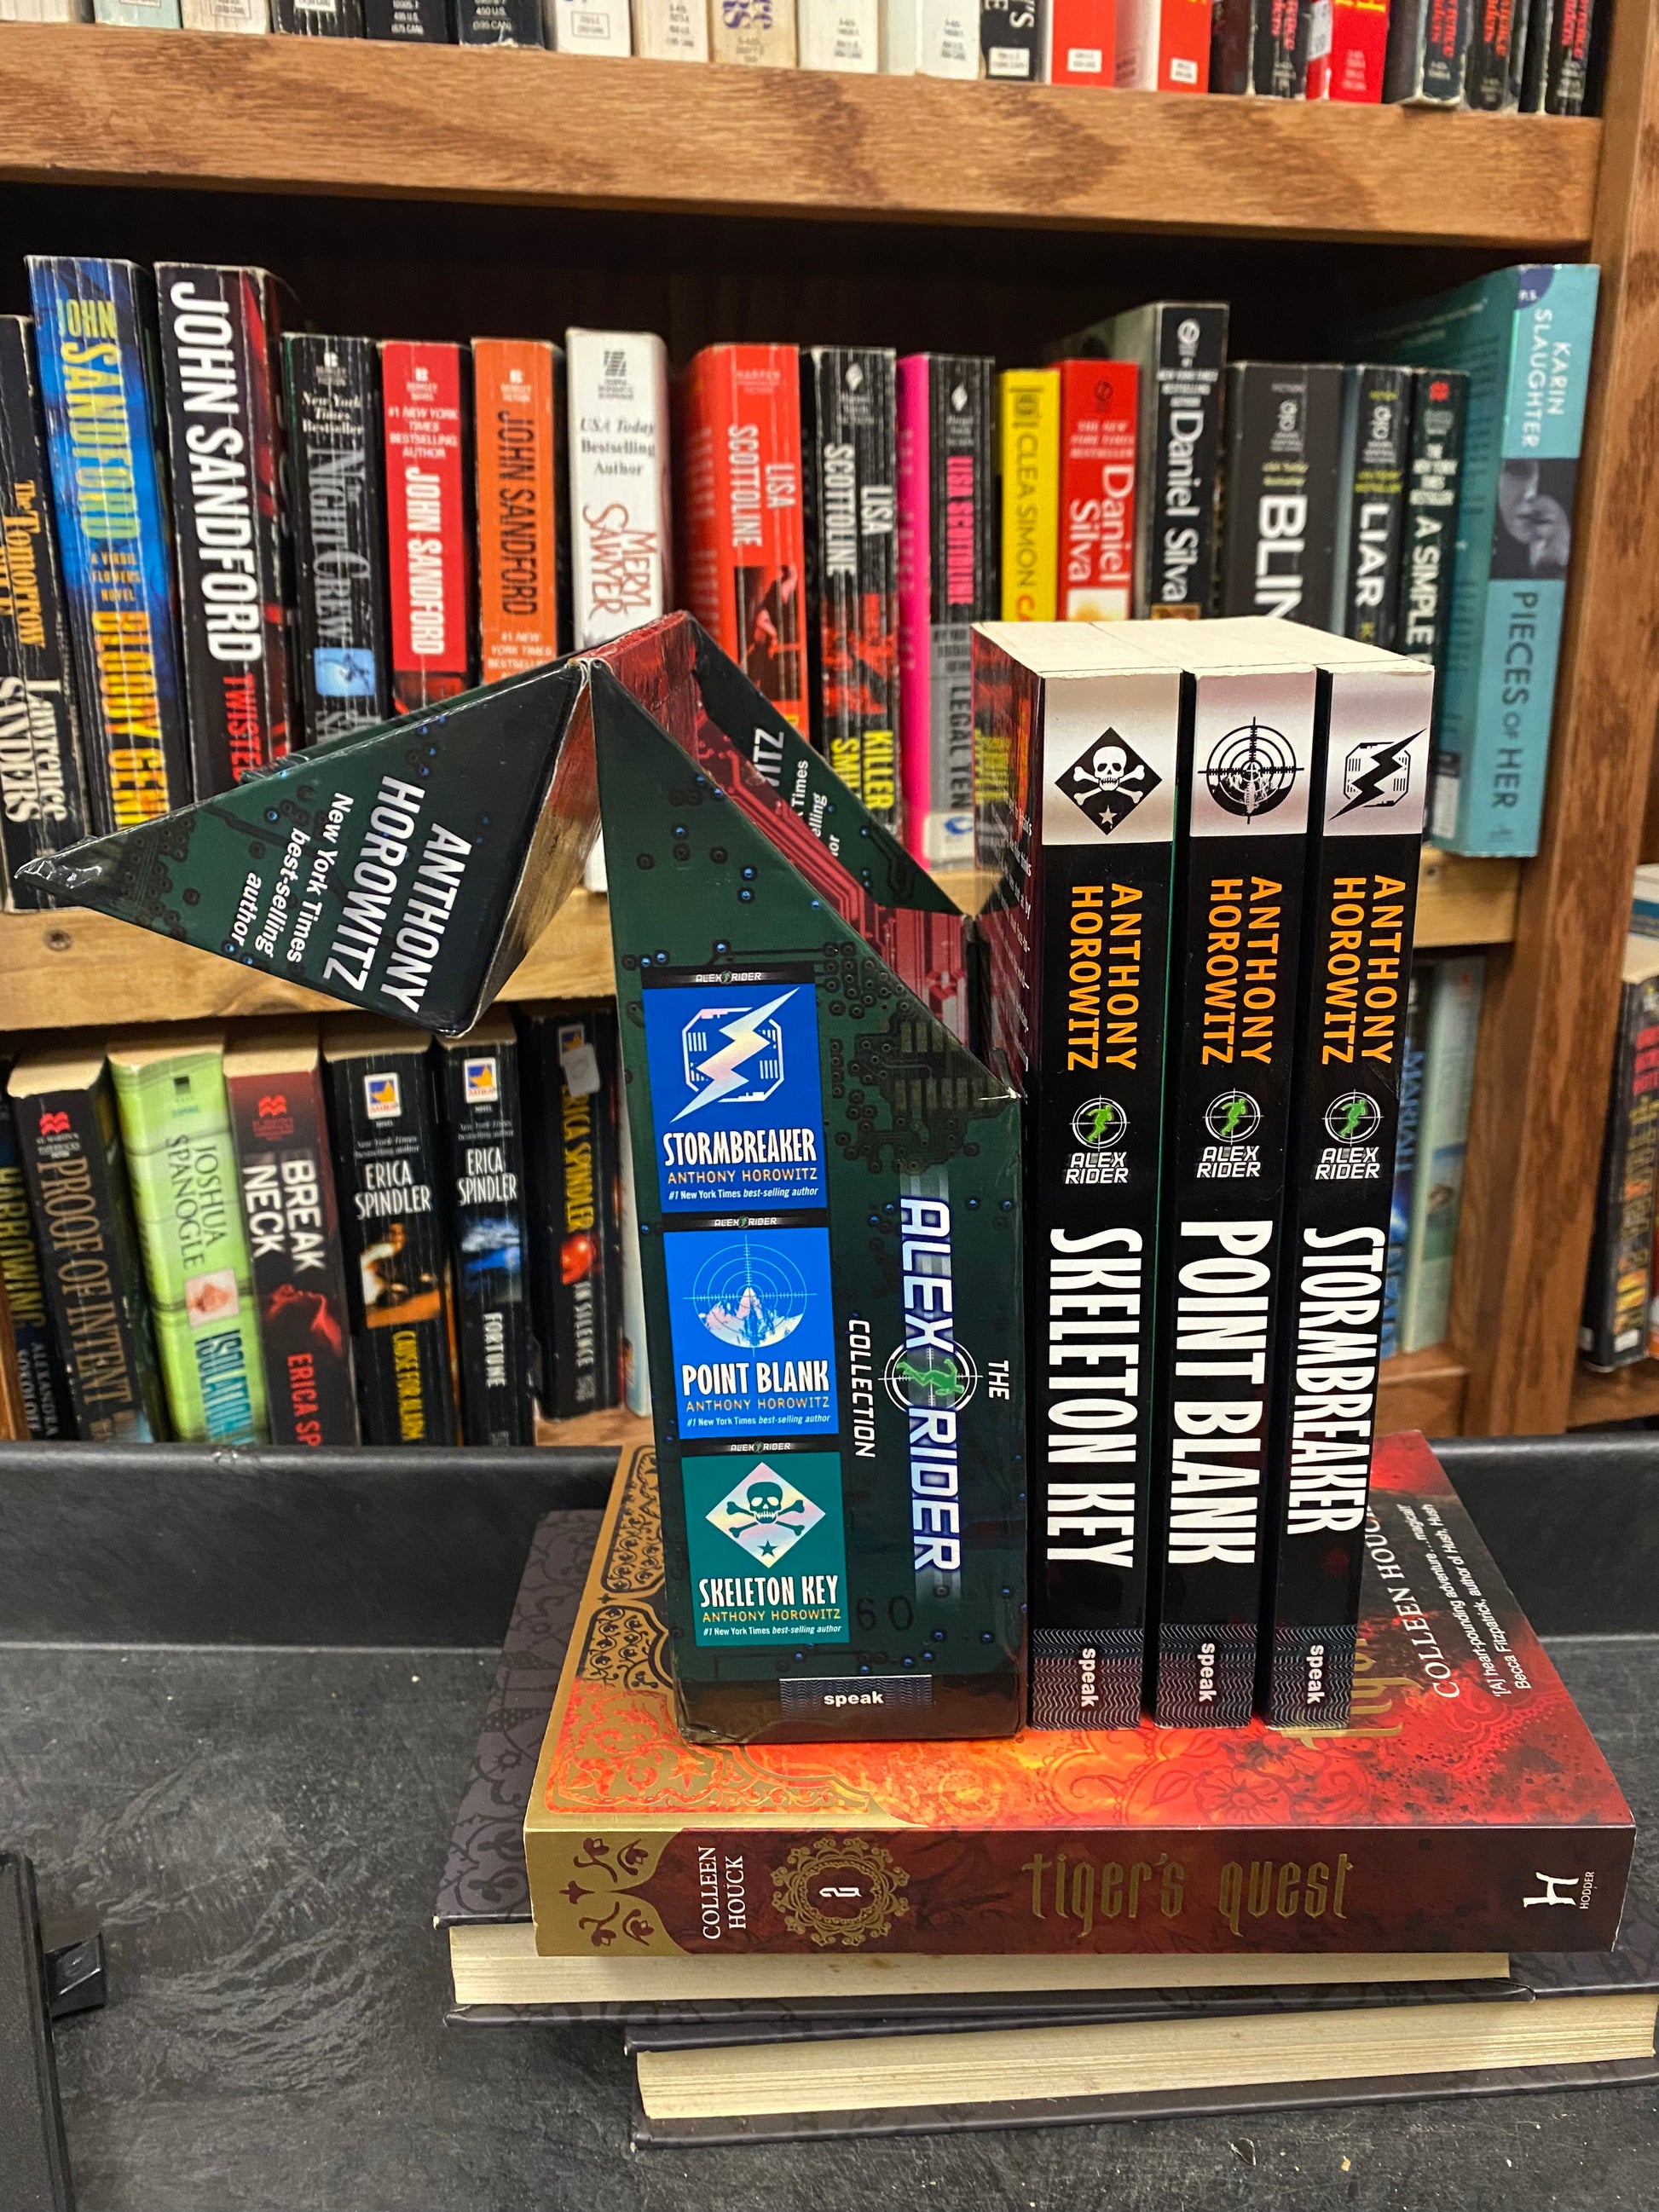 The Alex Rider Collection by Anthony Horowitz - Dead Tree Dreams Bookstore